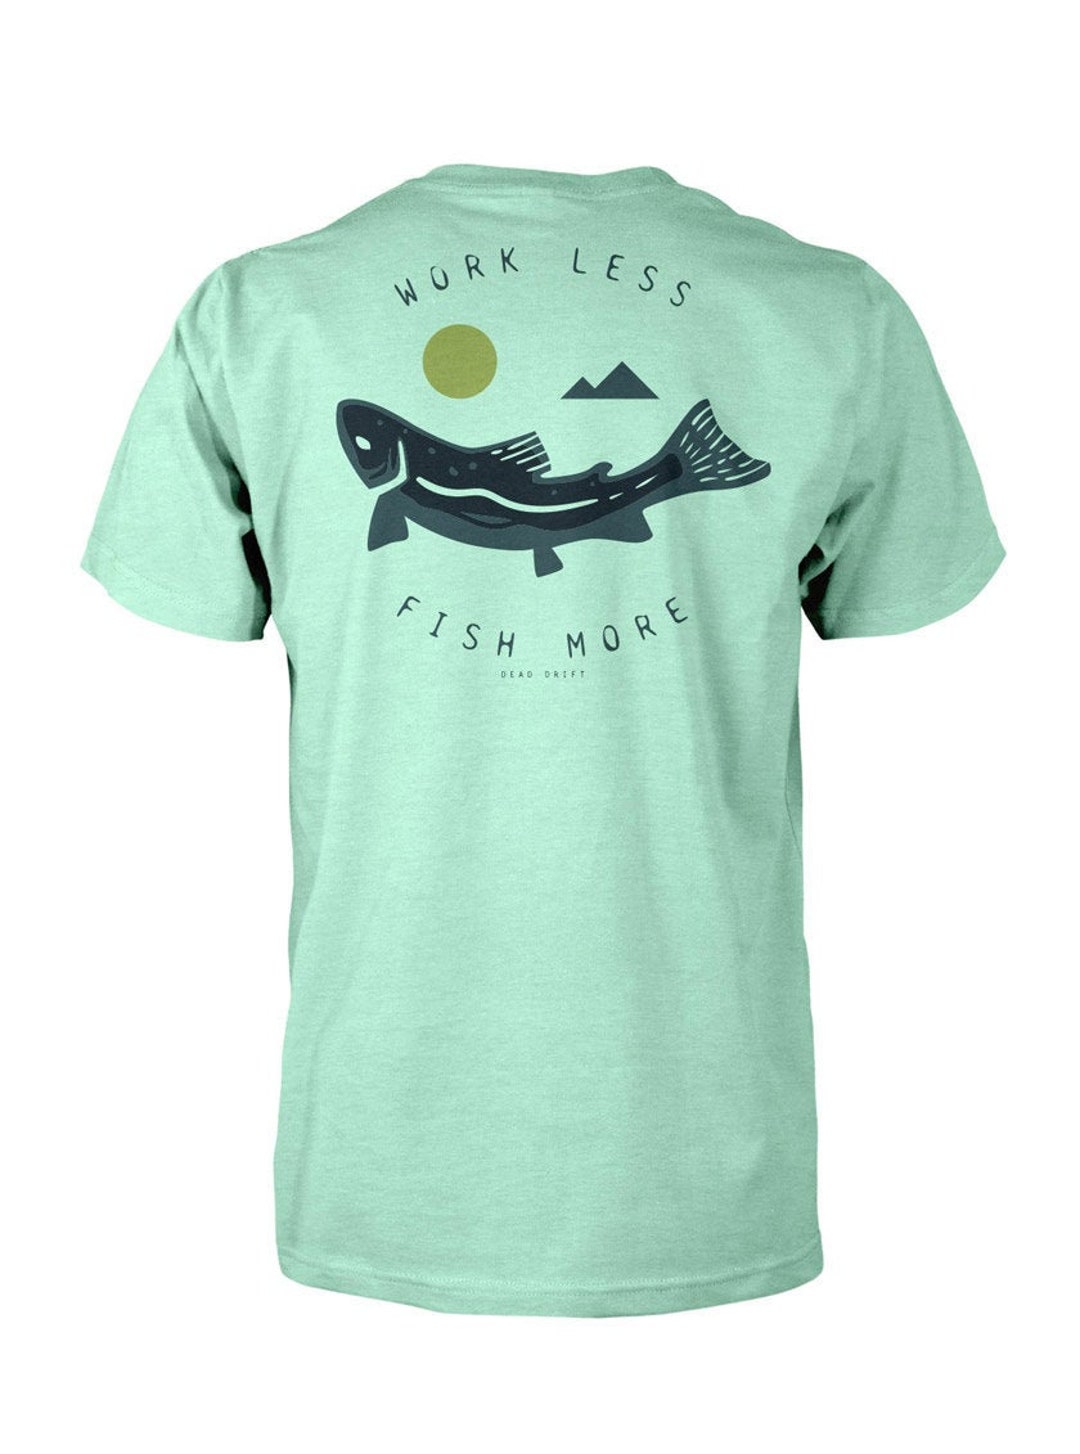 Work Less Fish More Tee -  Canada